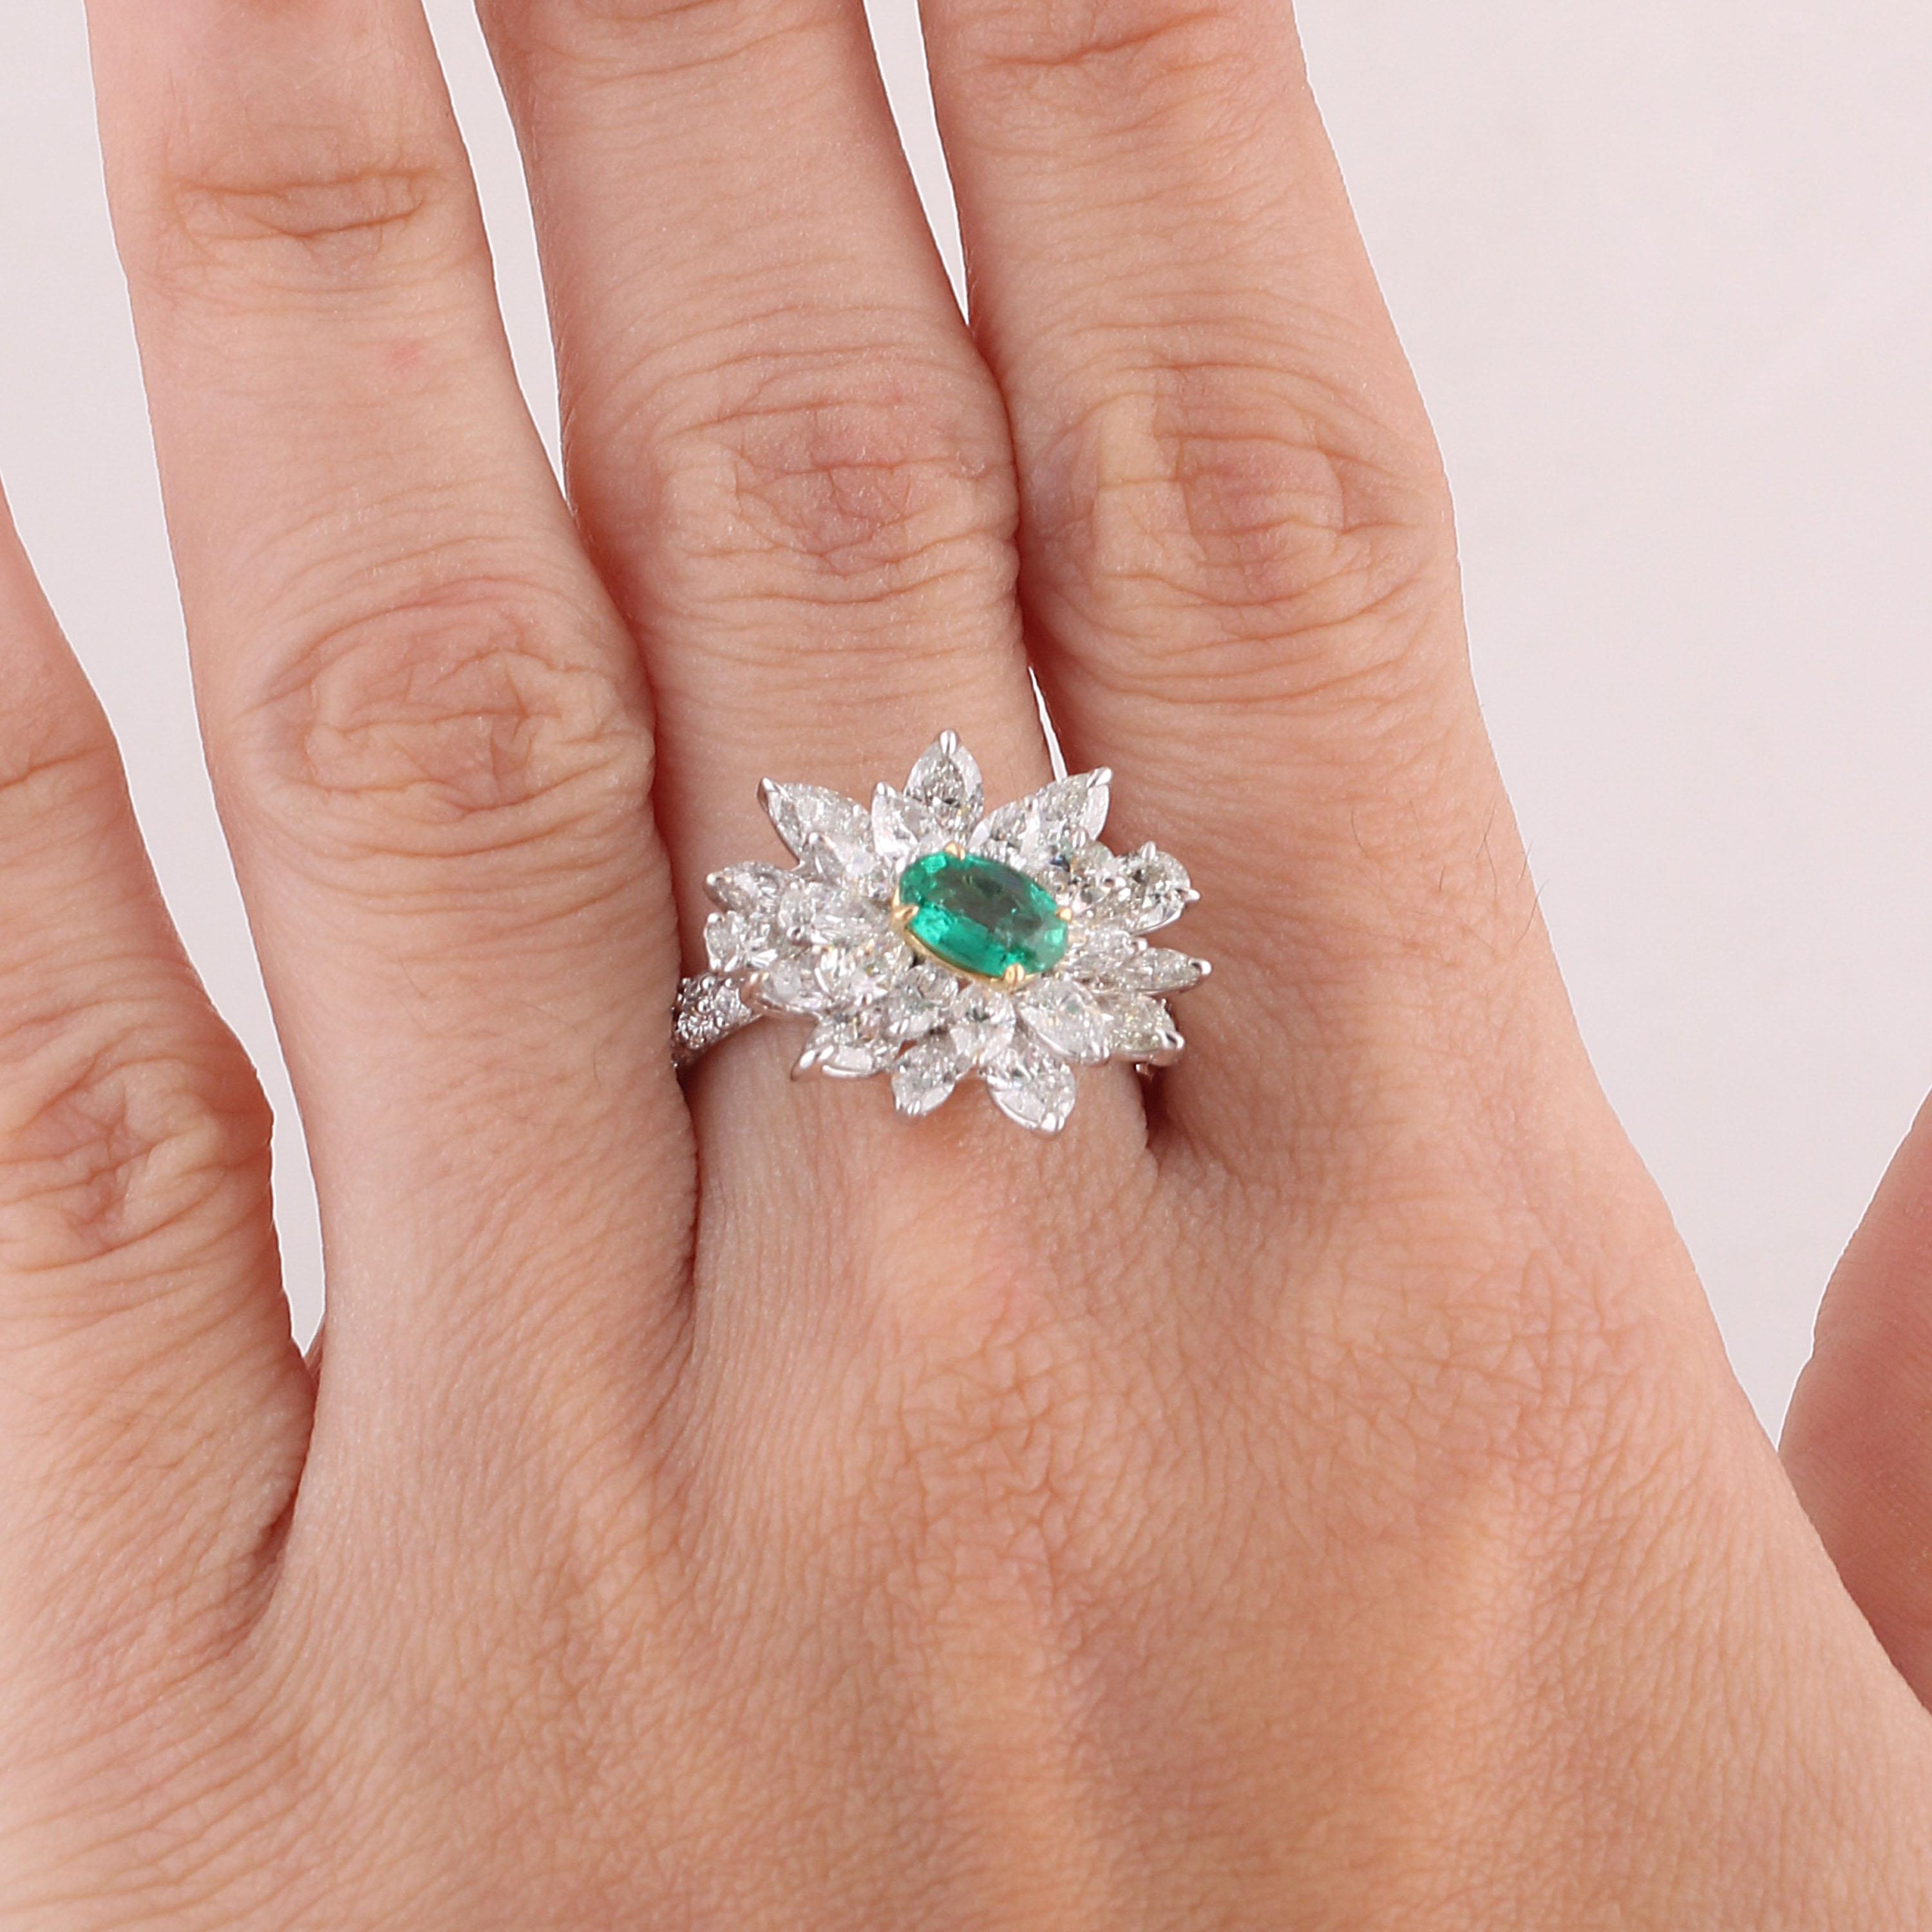 Gross Weight: 6.71 Grams
Diamond Weight: 3.26 cts
Emerald Weight: 0.62 cts
Ring Size: US 6.5 (Resizing can be Done)
IGI Certified

Matching Earrings are Available.

Video of the product can be shared upon request.

Emeralds have the distinct power